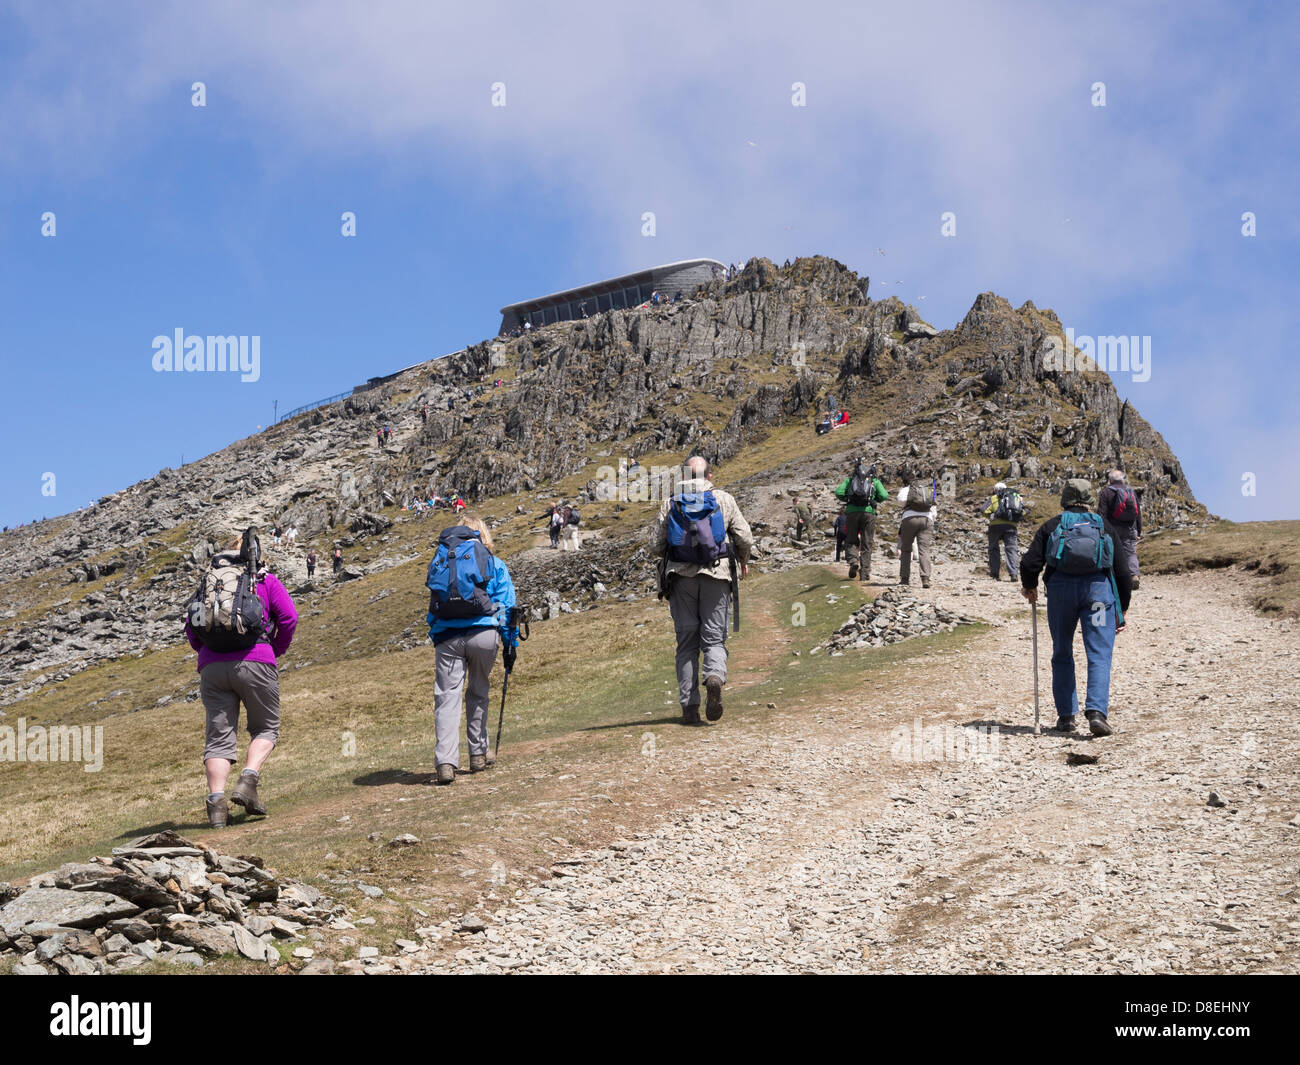 Hikers hiking on Rhyd Ddu path up to Mount Snowdon summit cafe (Hafod Eryri) in Snowdonia National Park North Wales UK Britain Stock Photo